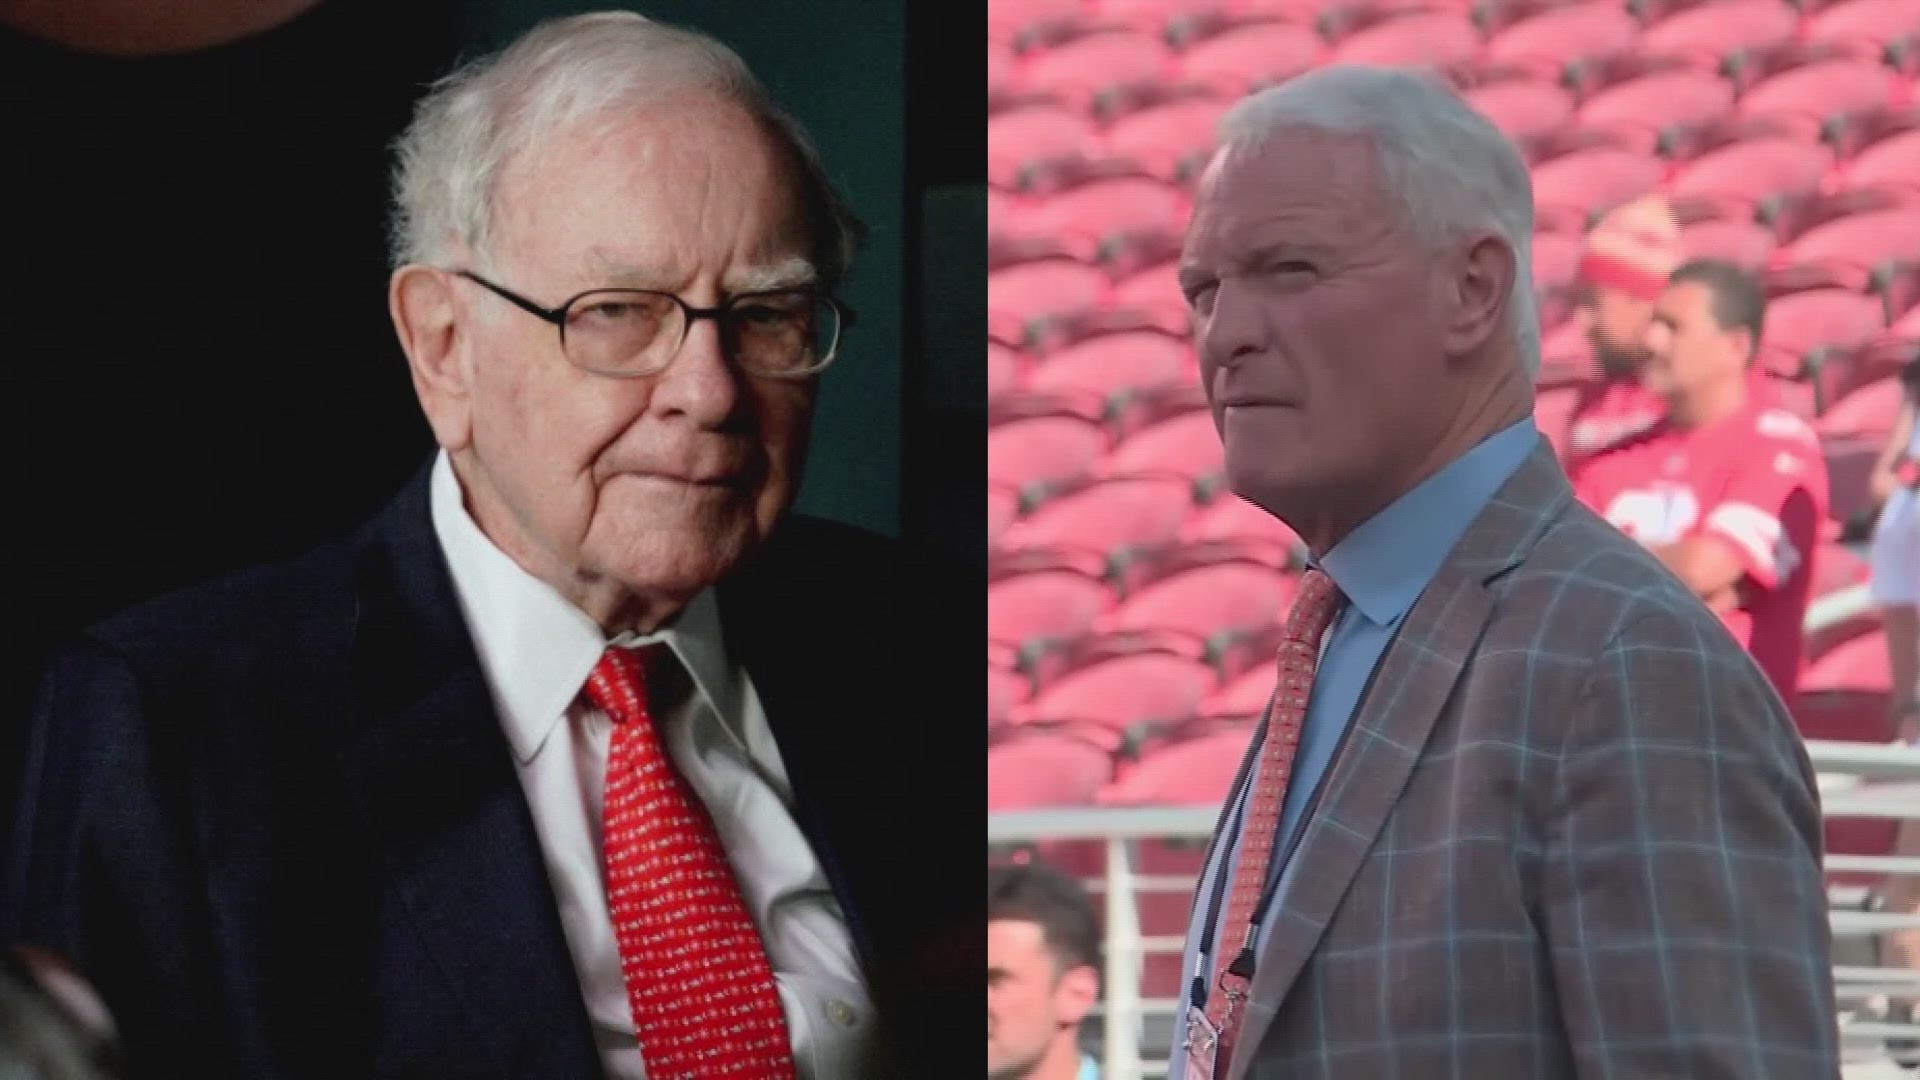 Warren Buffett's Berkshire Hathaway is accusing the Haslam family, including Browns owner Jimmy Haslam, of trying to bribe at least 15 Pilot executives.